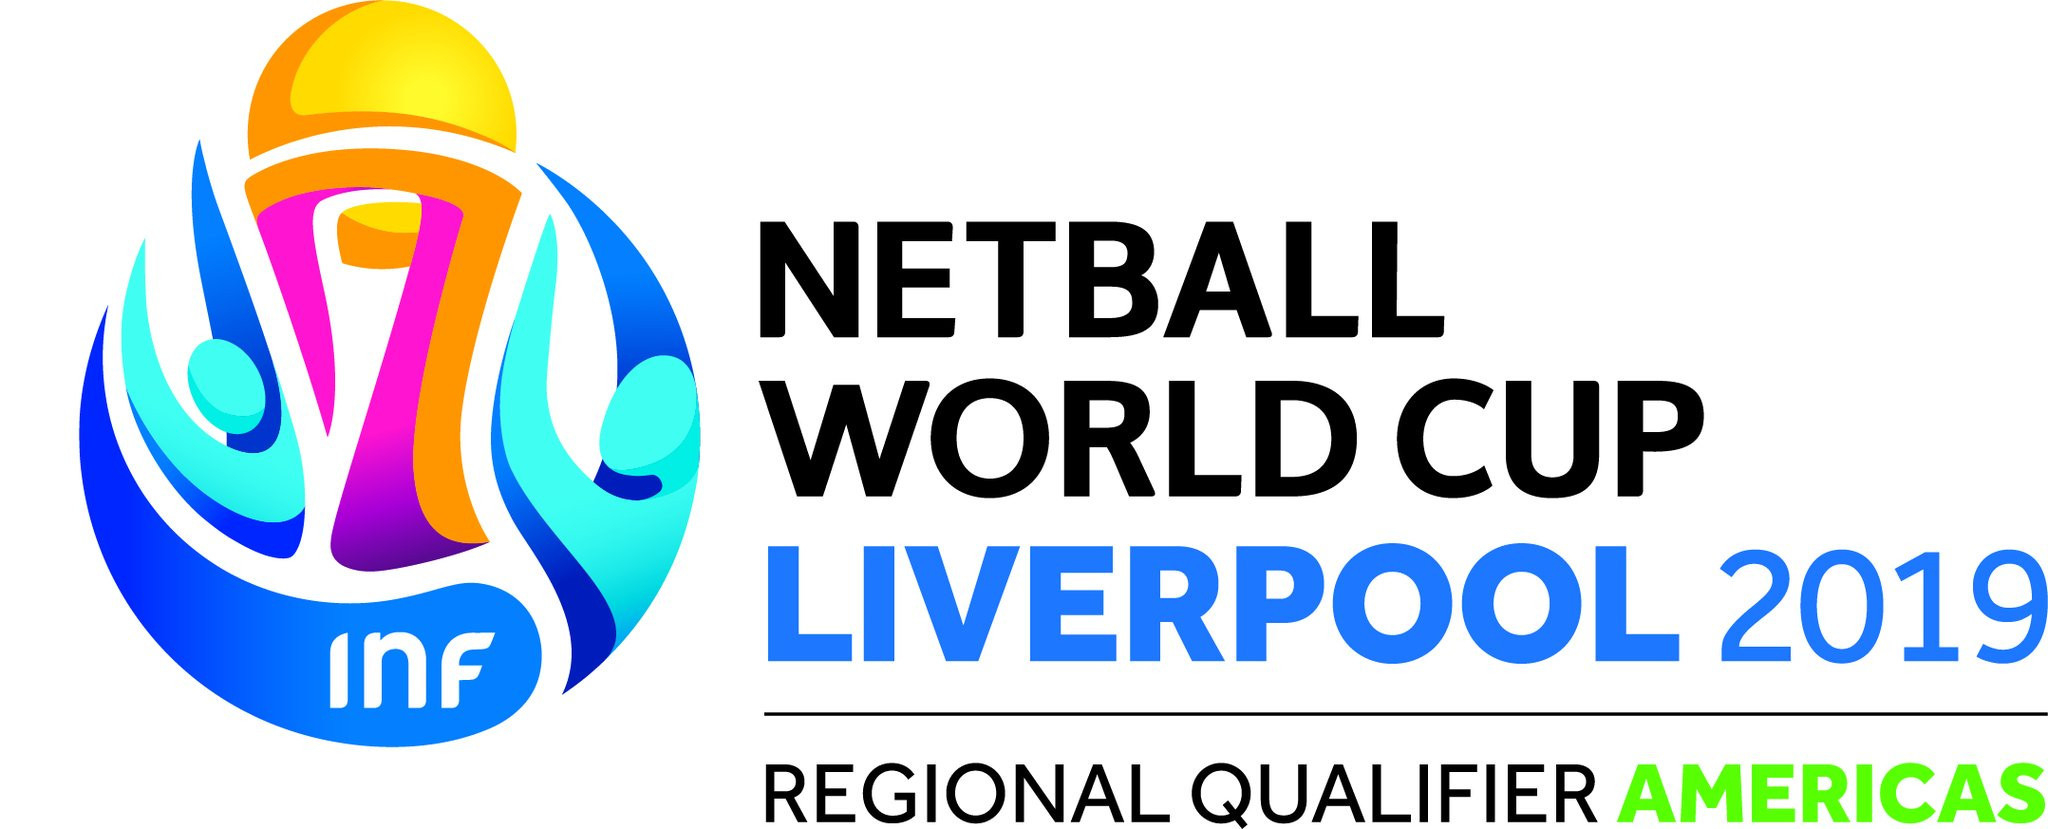 The Americas qualifier follows the equivalent event in Africa and Singapore will host the Asian edition ©Netball World Cup/Twitter